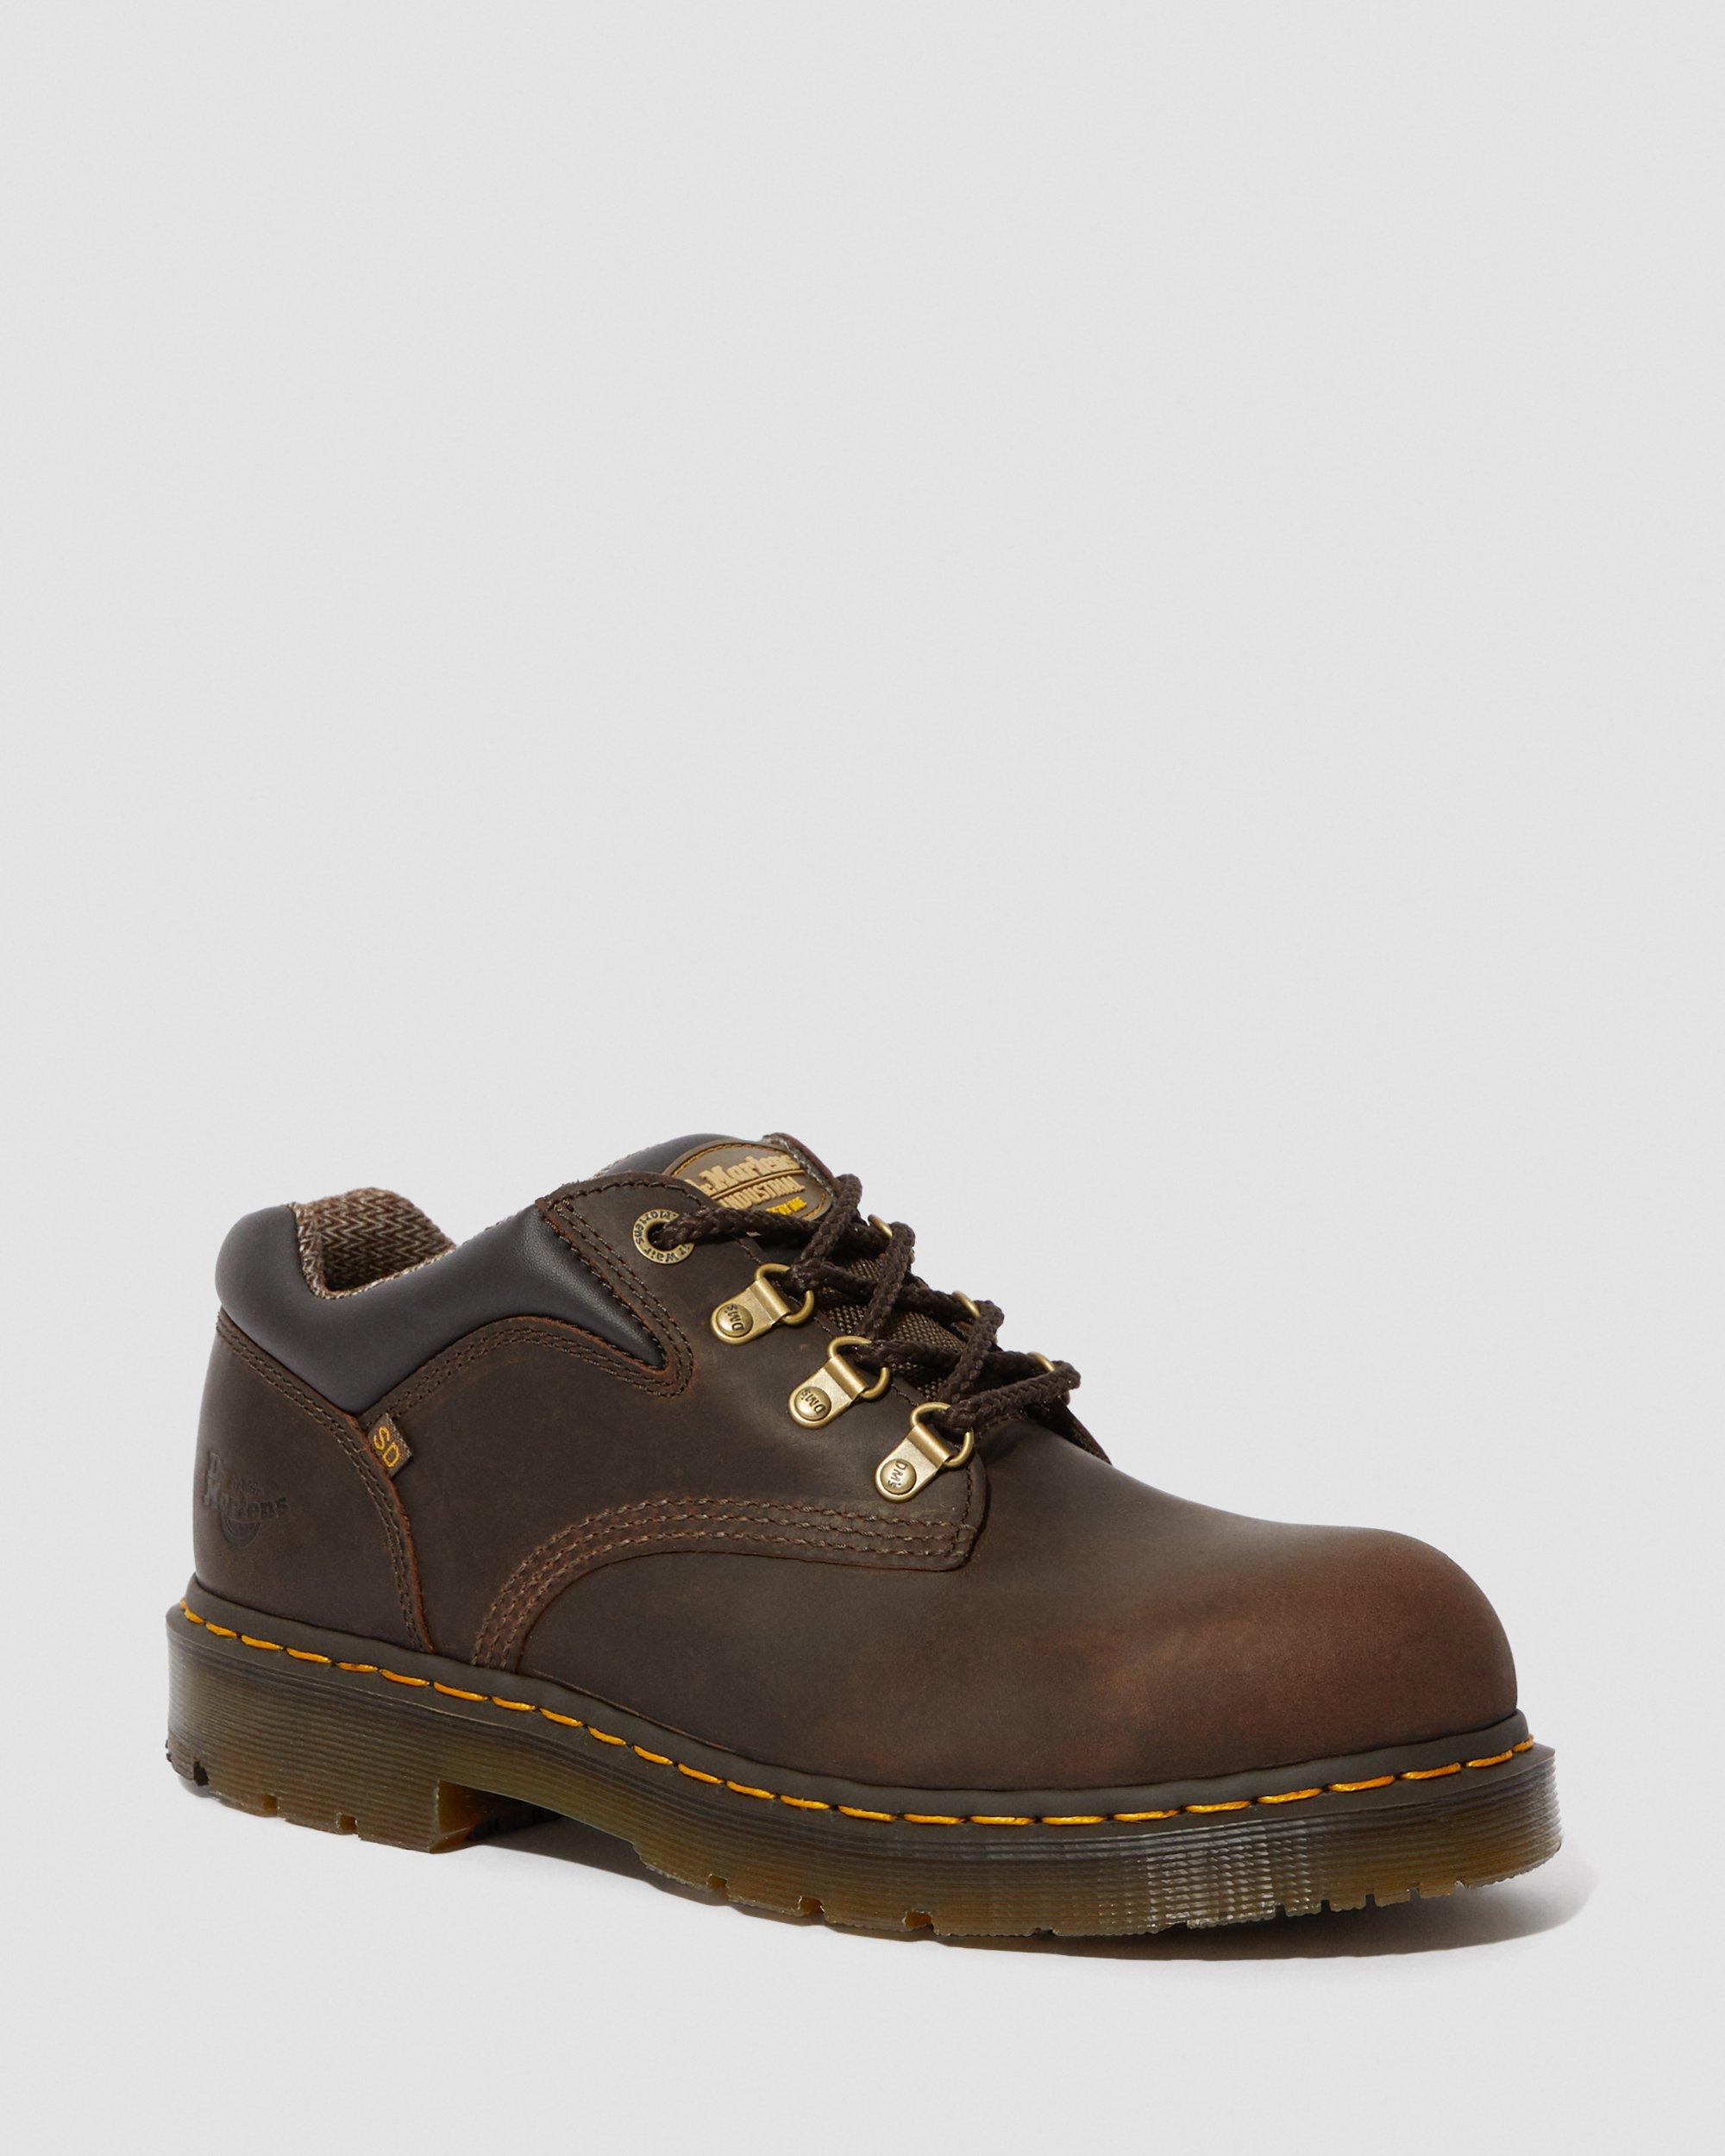 Hylow Steel Toe Work Boots | Dr. Martens